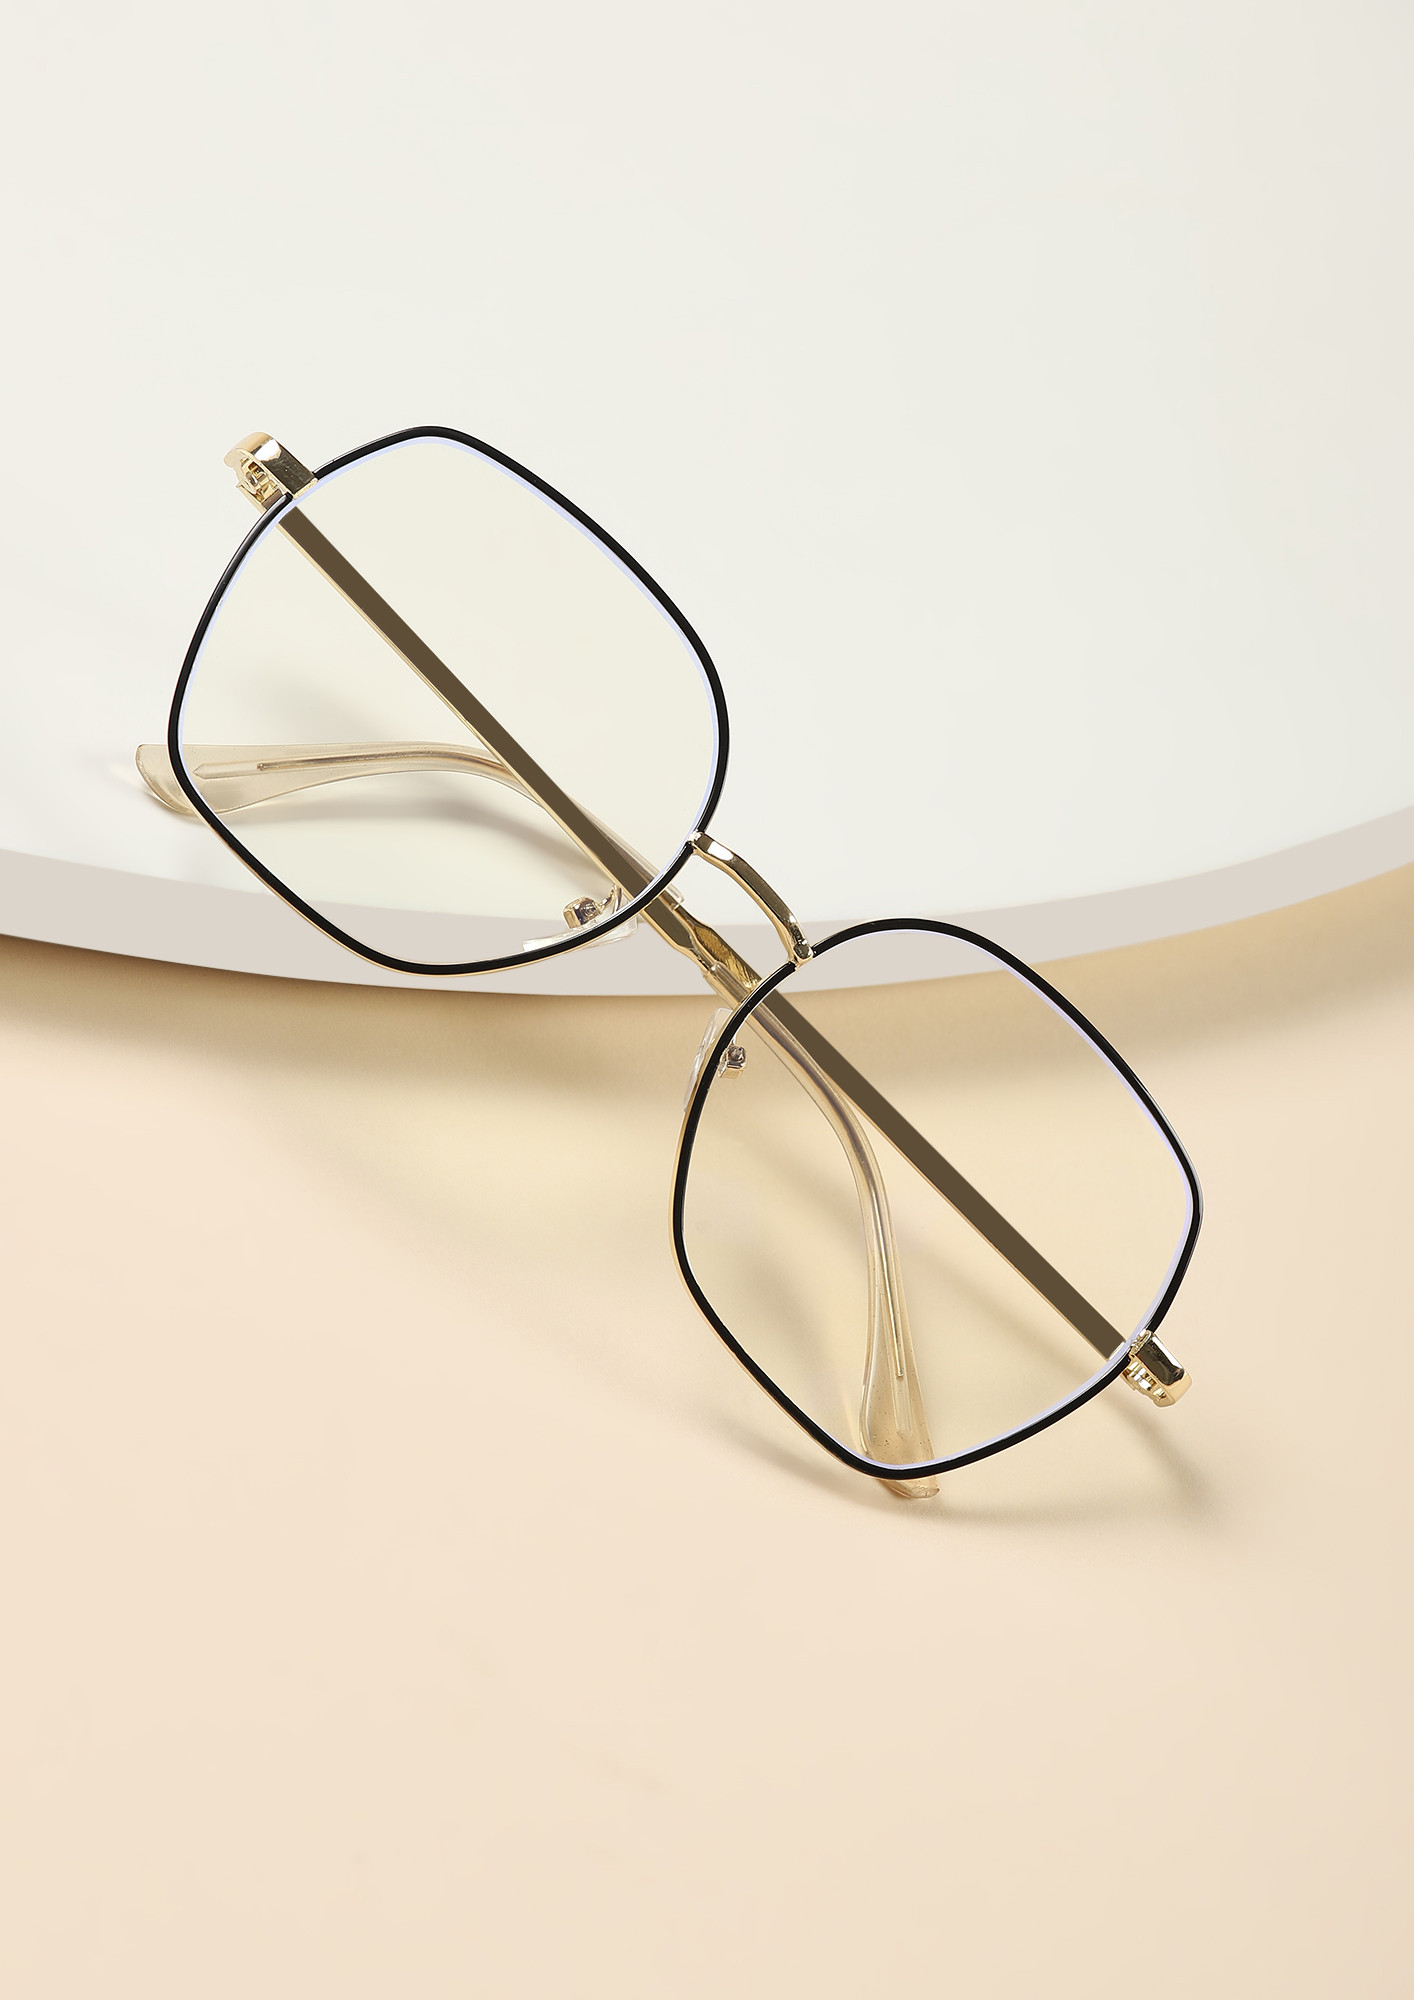 CLEAR AND CALM BLACK AND GOLDEN  SQUARE SUNGLASSES